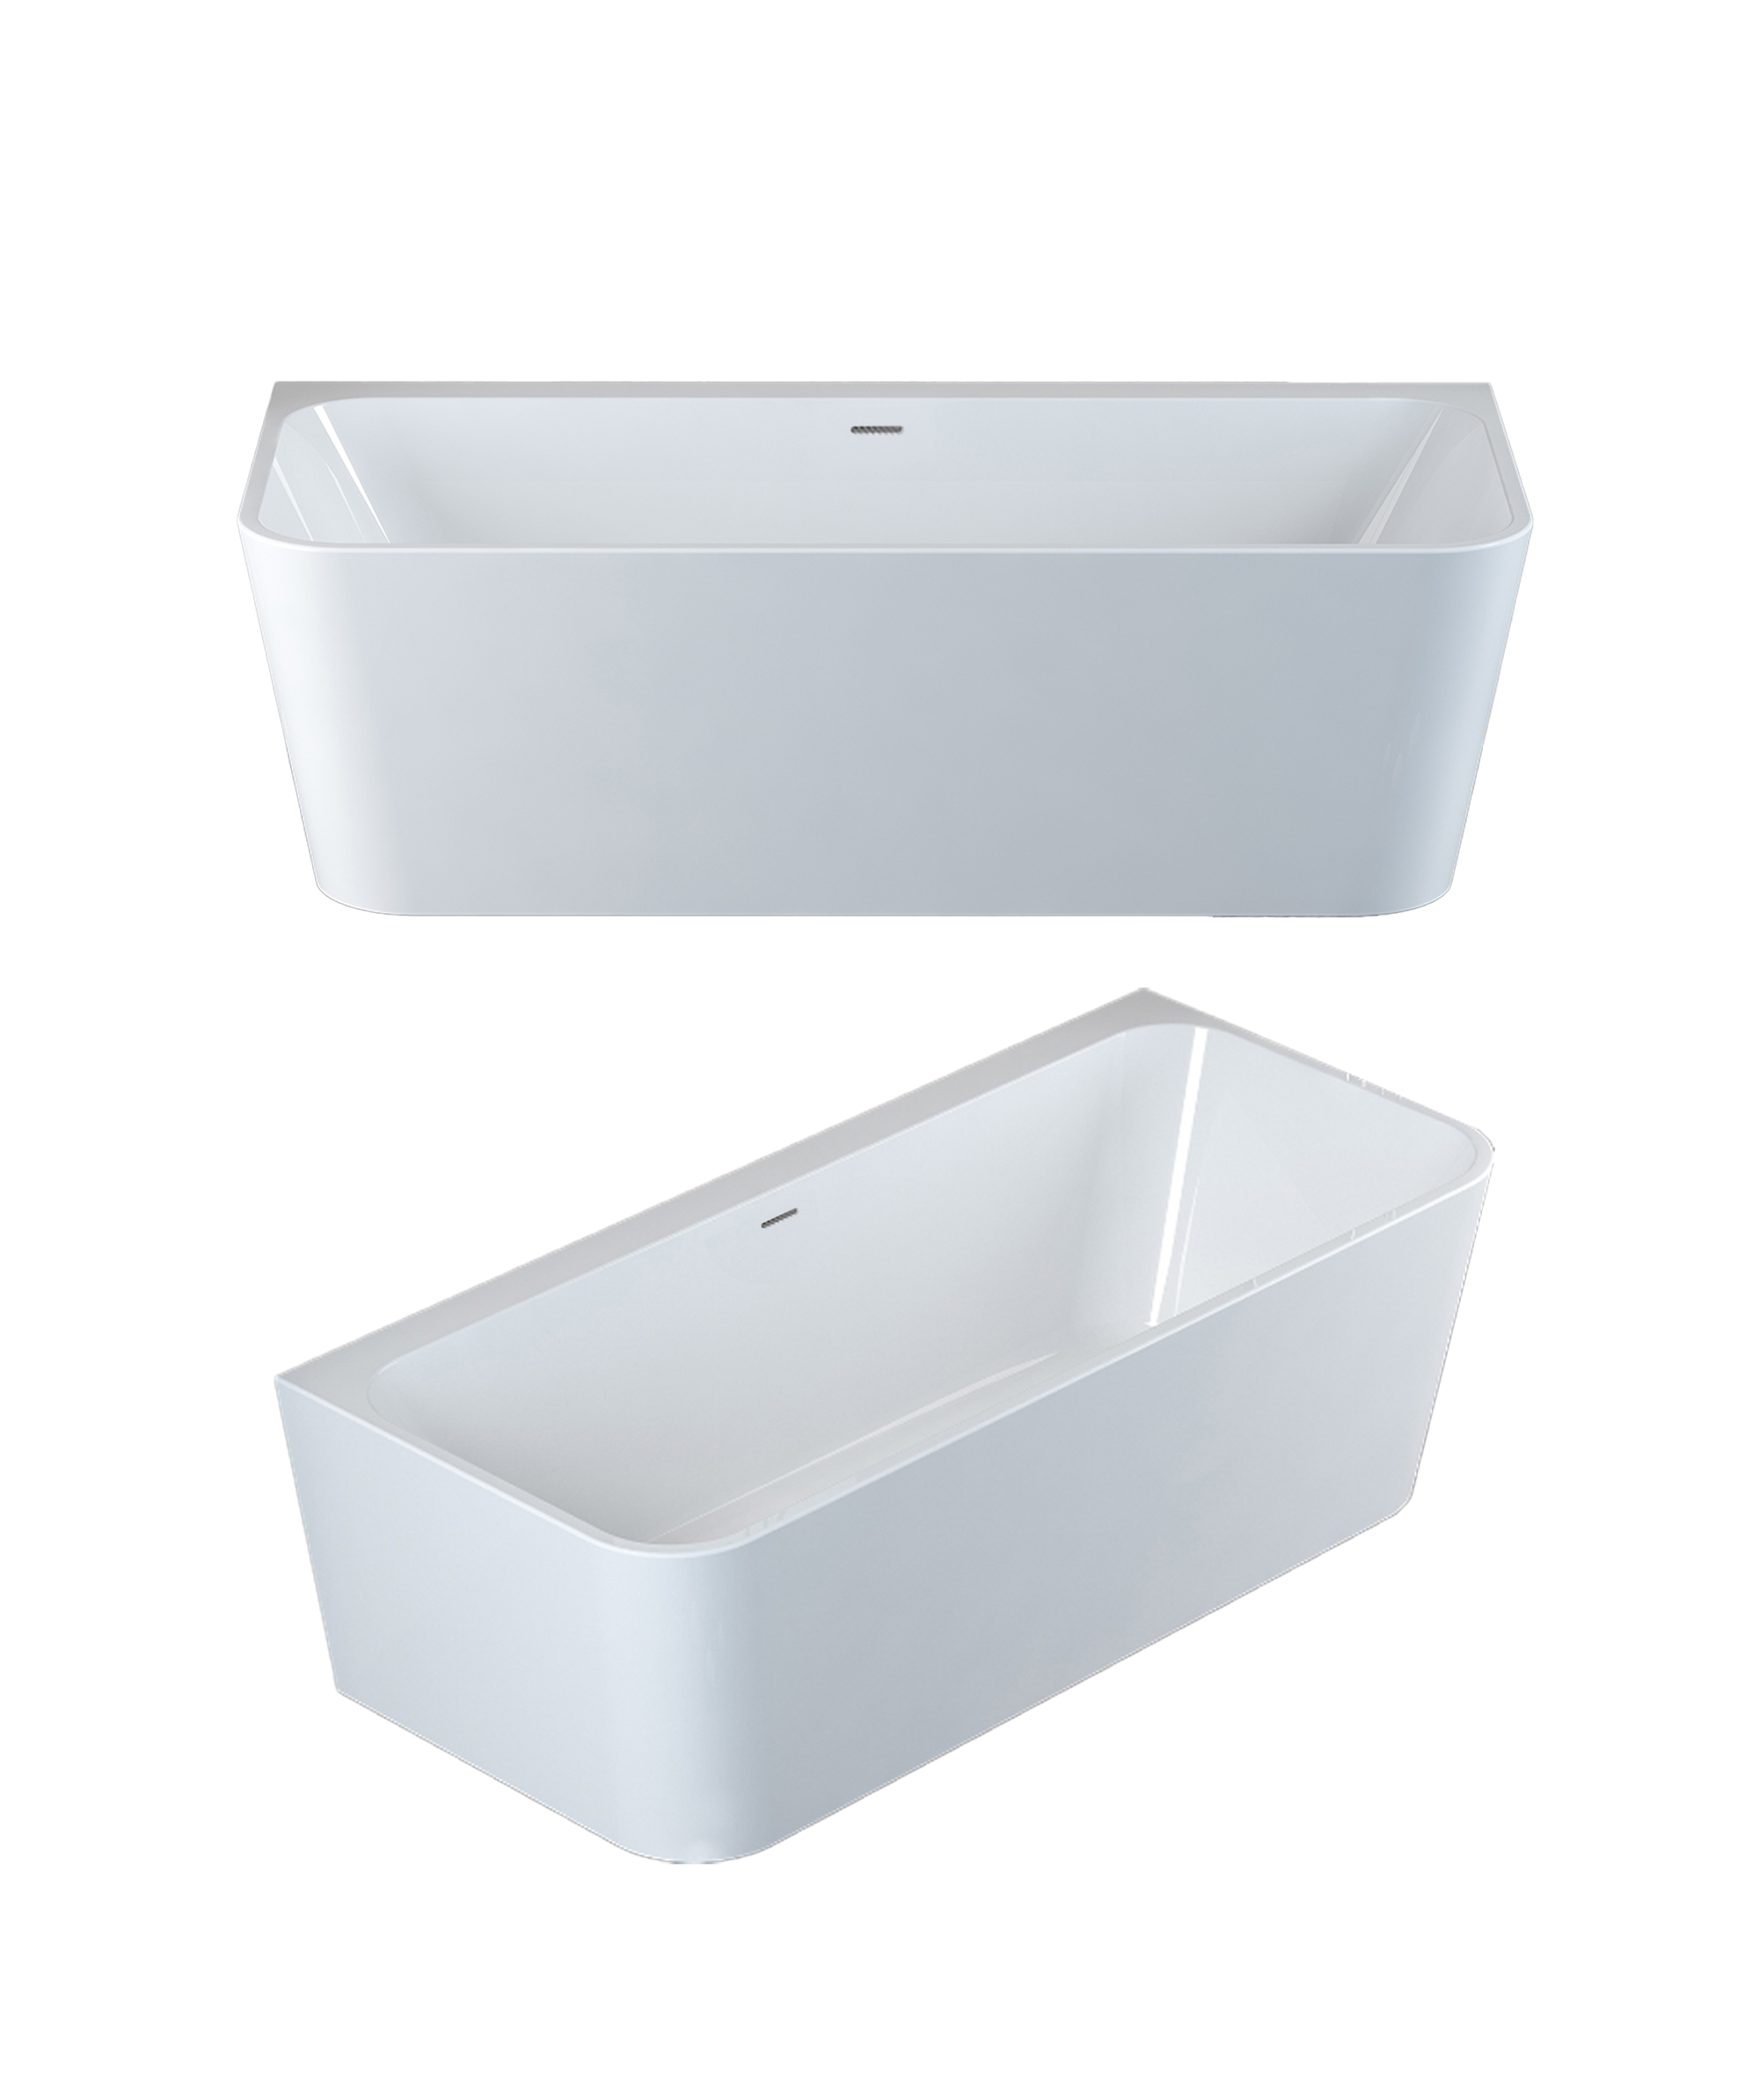 Plati 135 Back-to-wall freestanding bath - with integrated slot overflow